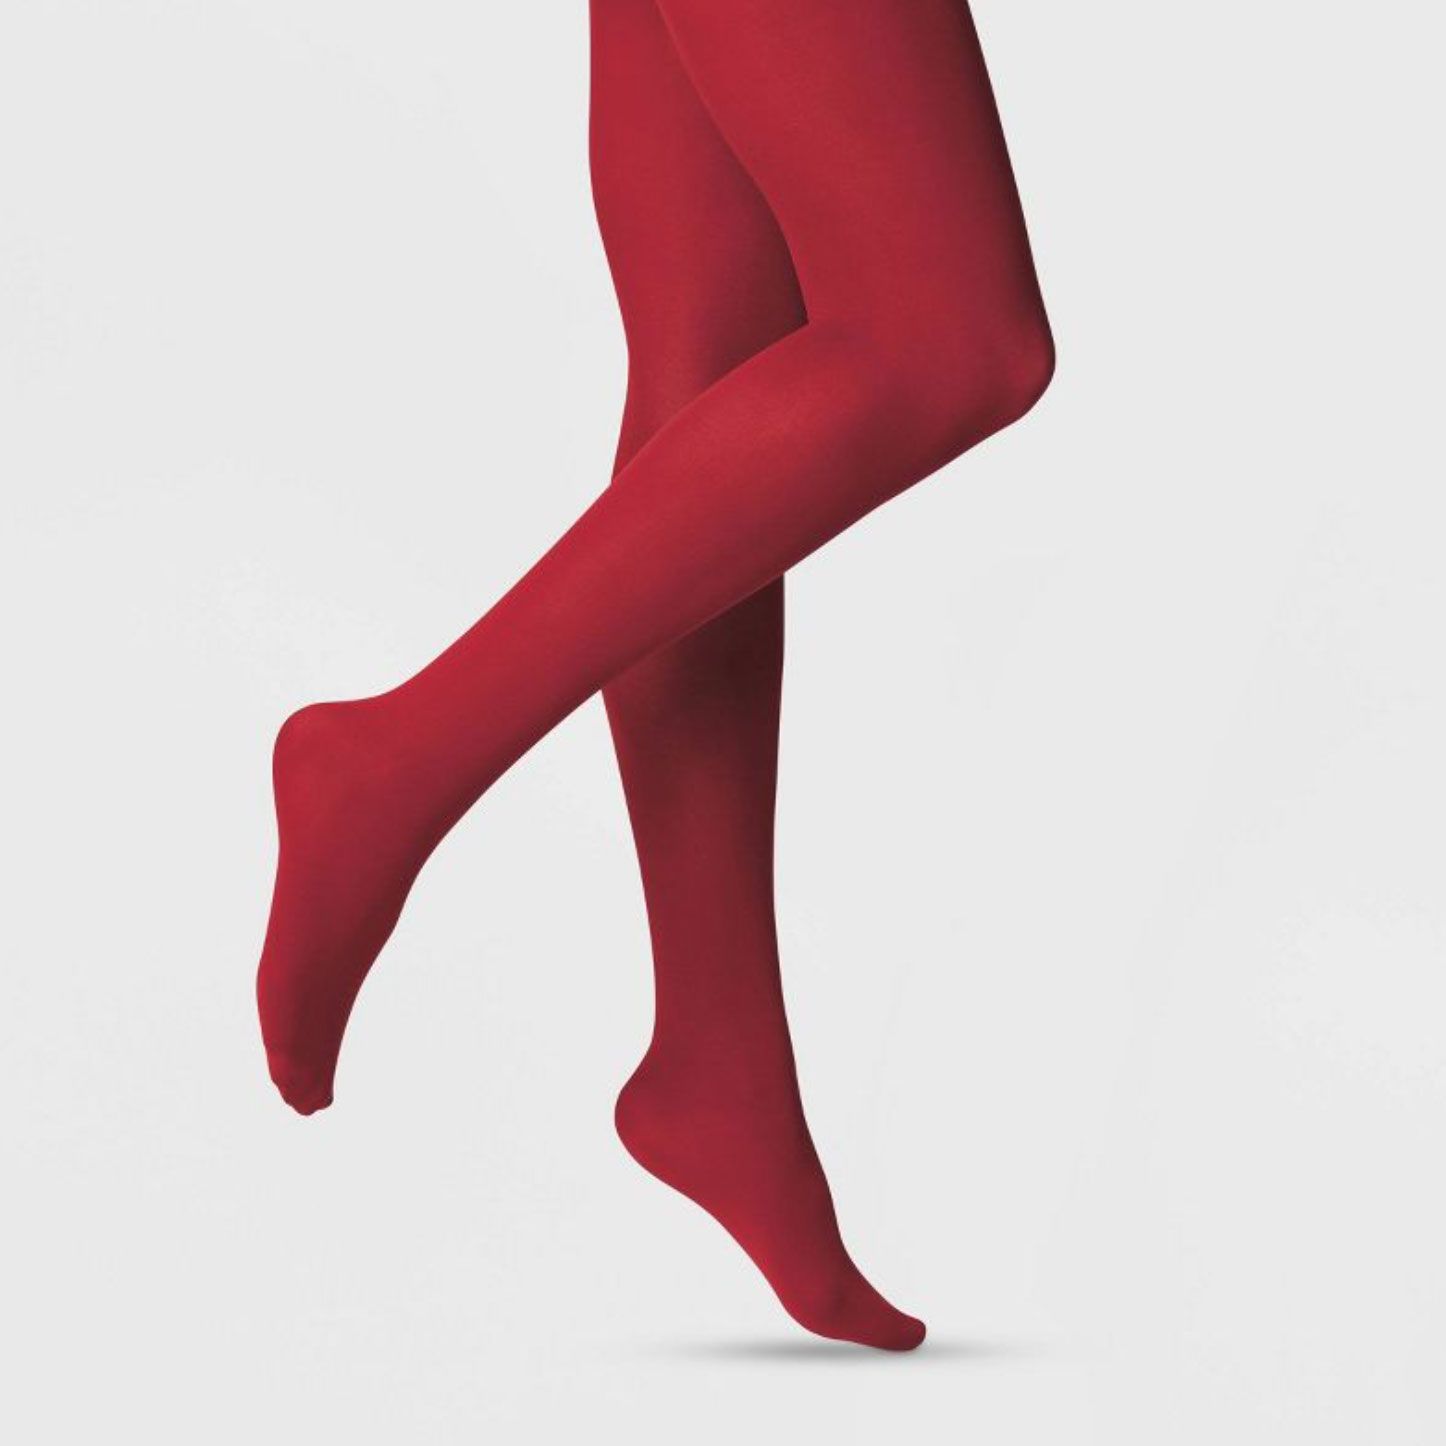 Pack of 02 Plain Tights in red and black colour for women 